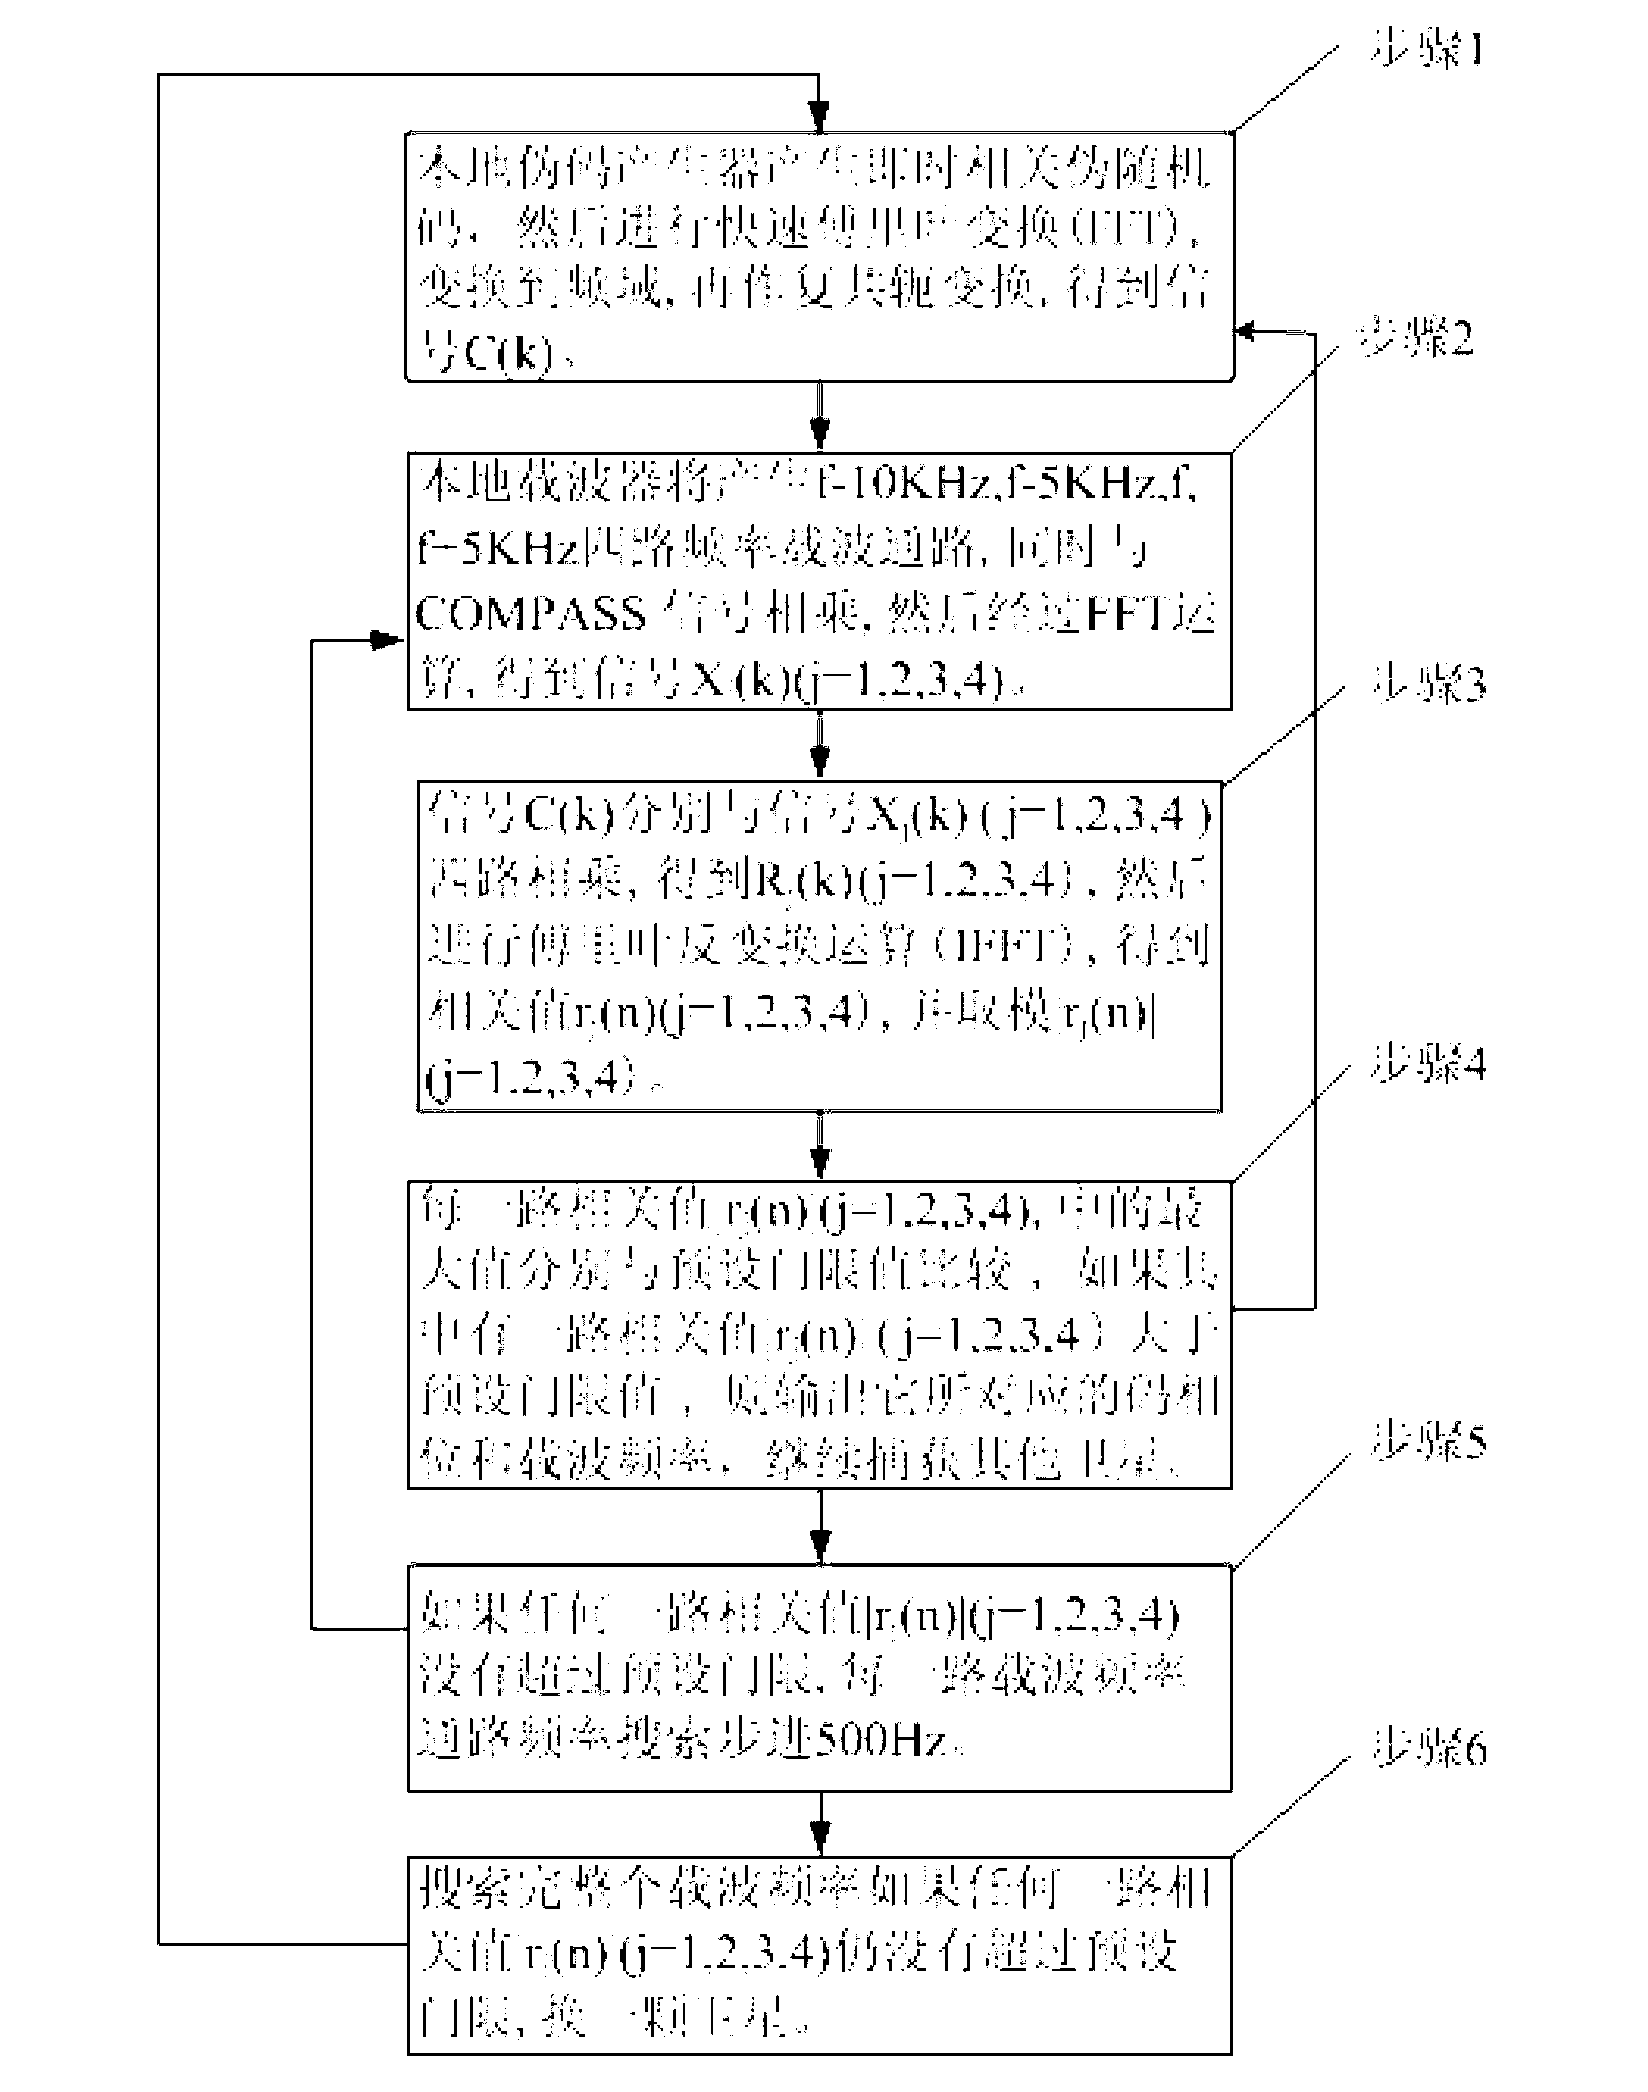 Method for fast capturing COMPASS signal